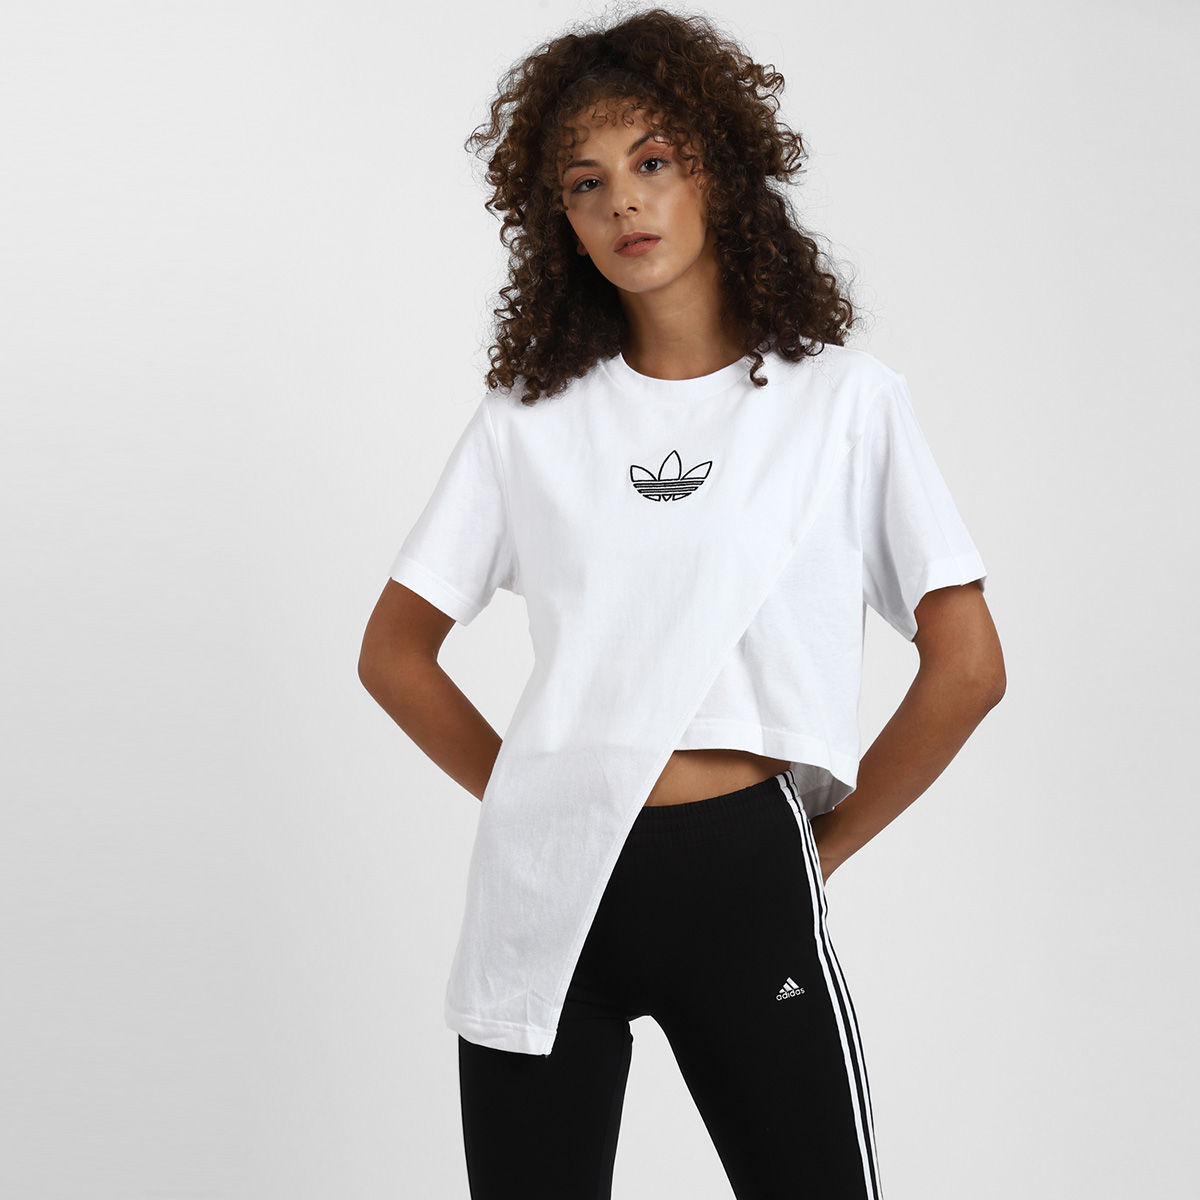 adidas Originals BOXY T-SHIRT White Casual T-shirt (XXS-XS): Buy adidas Originals BOXY White Casual T-shirt (XXS-XS) Online at Best Price in India | Nykaa